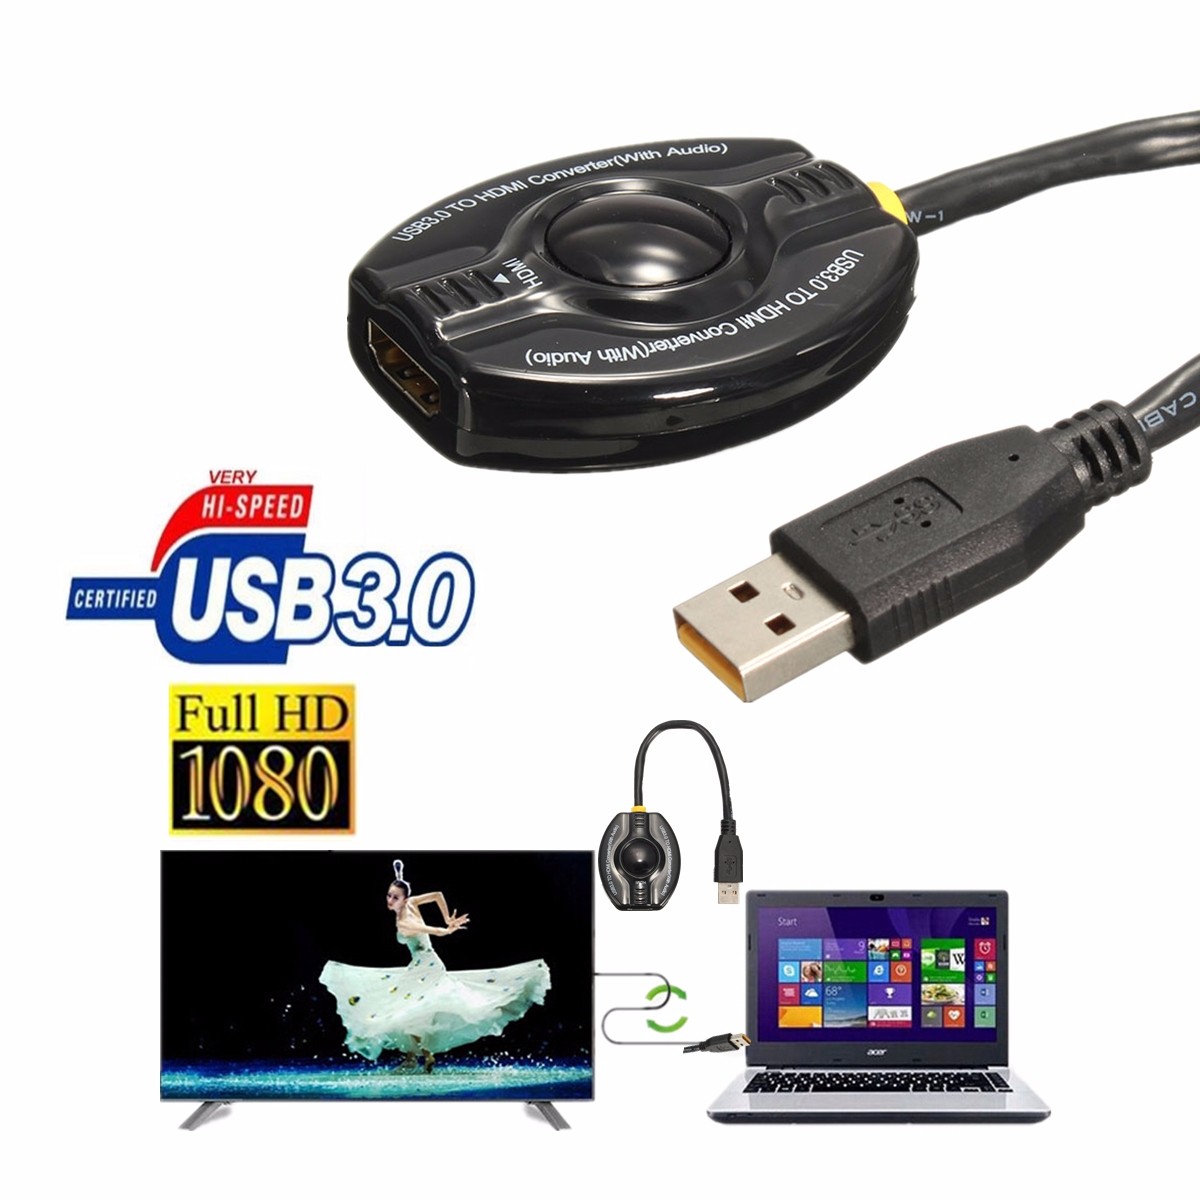 USB-30-to-HDMI-Adapter-Cable-5-Gbps-support-1080P-Projector-POS-System-CRT-LCD-LED-Monitor-1973033-1